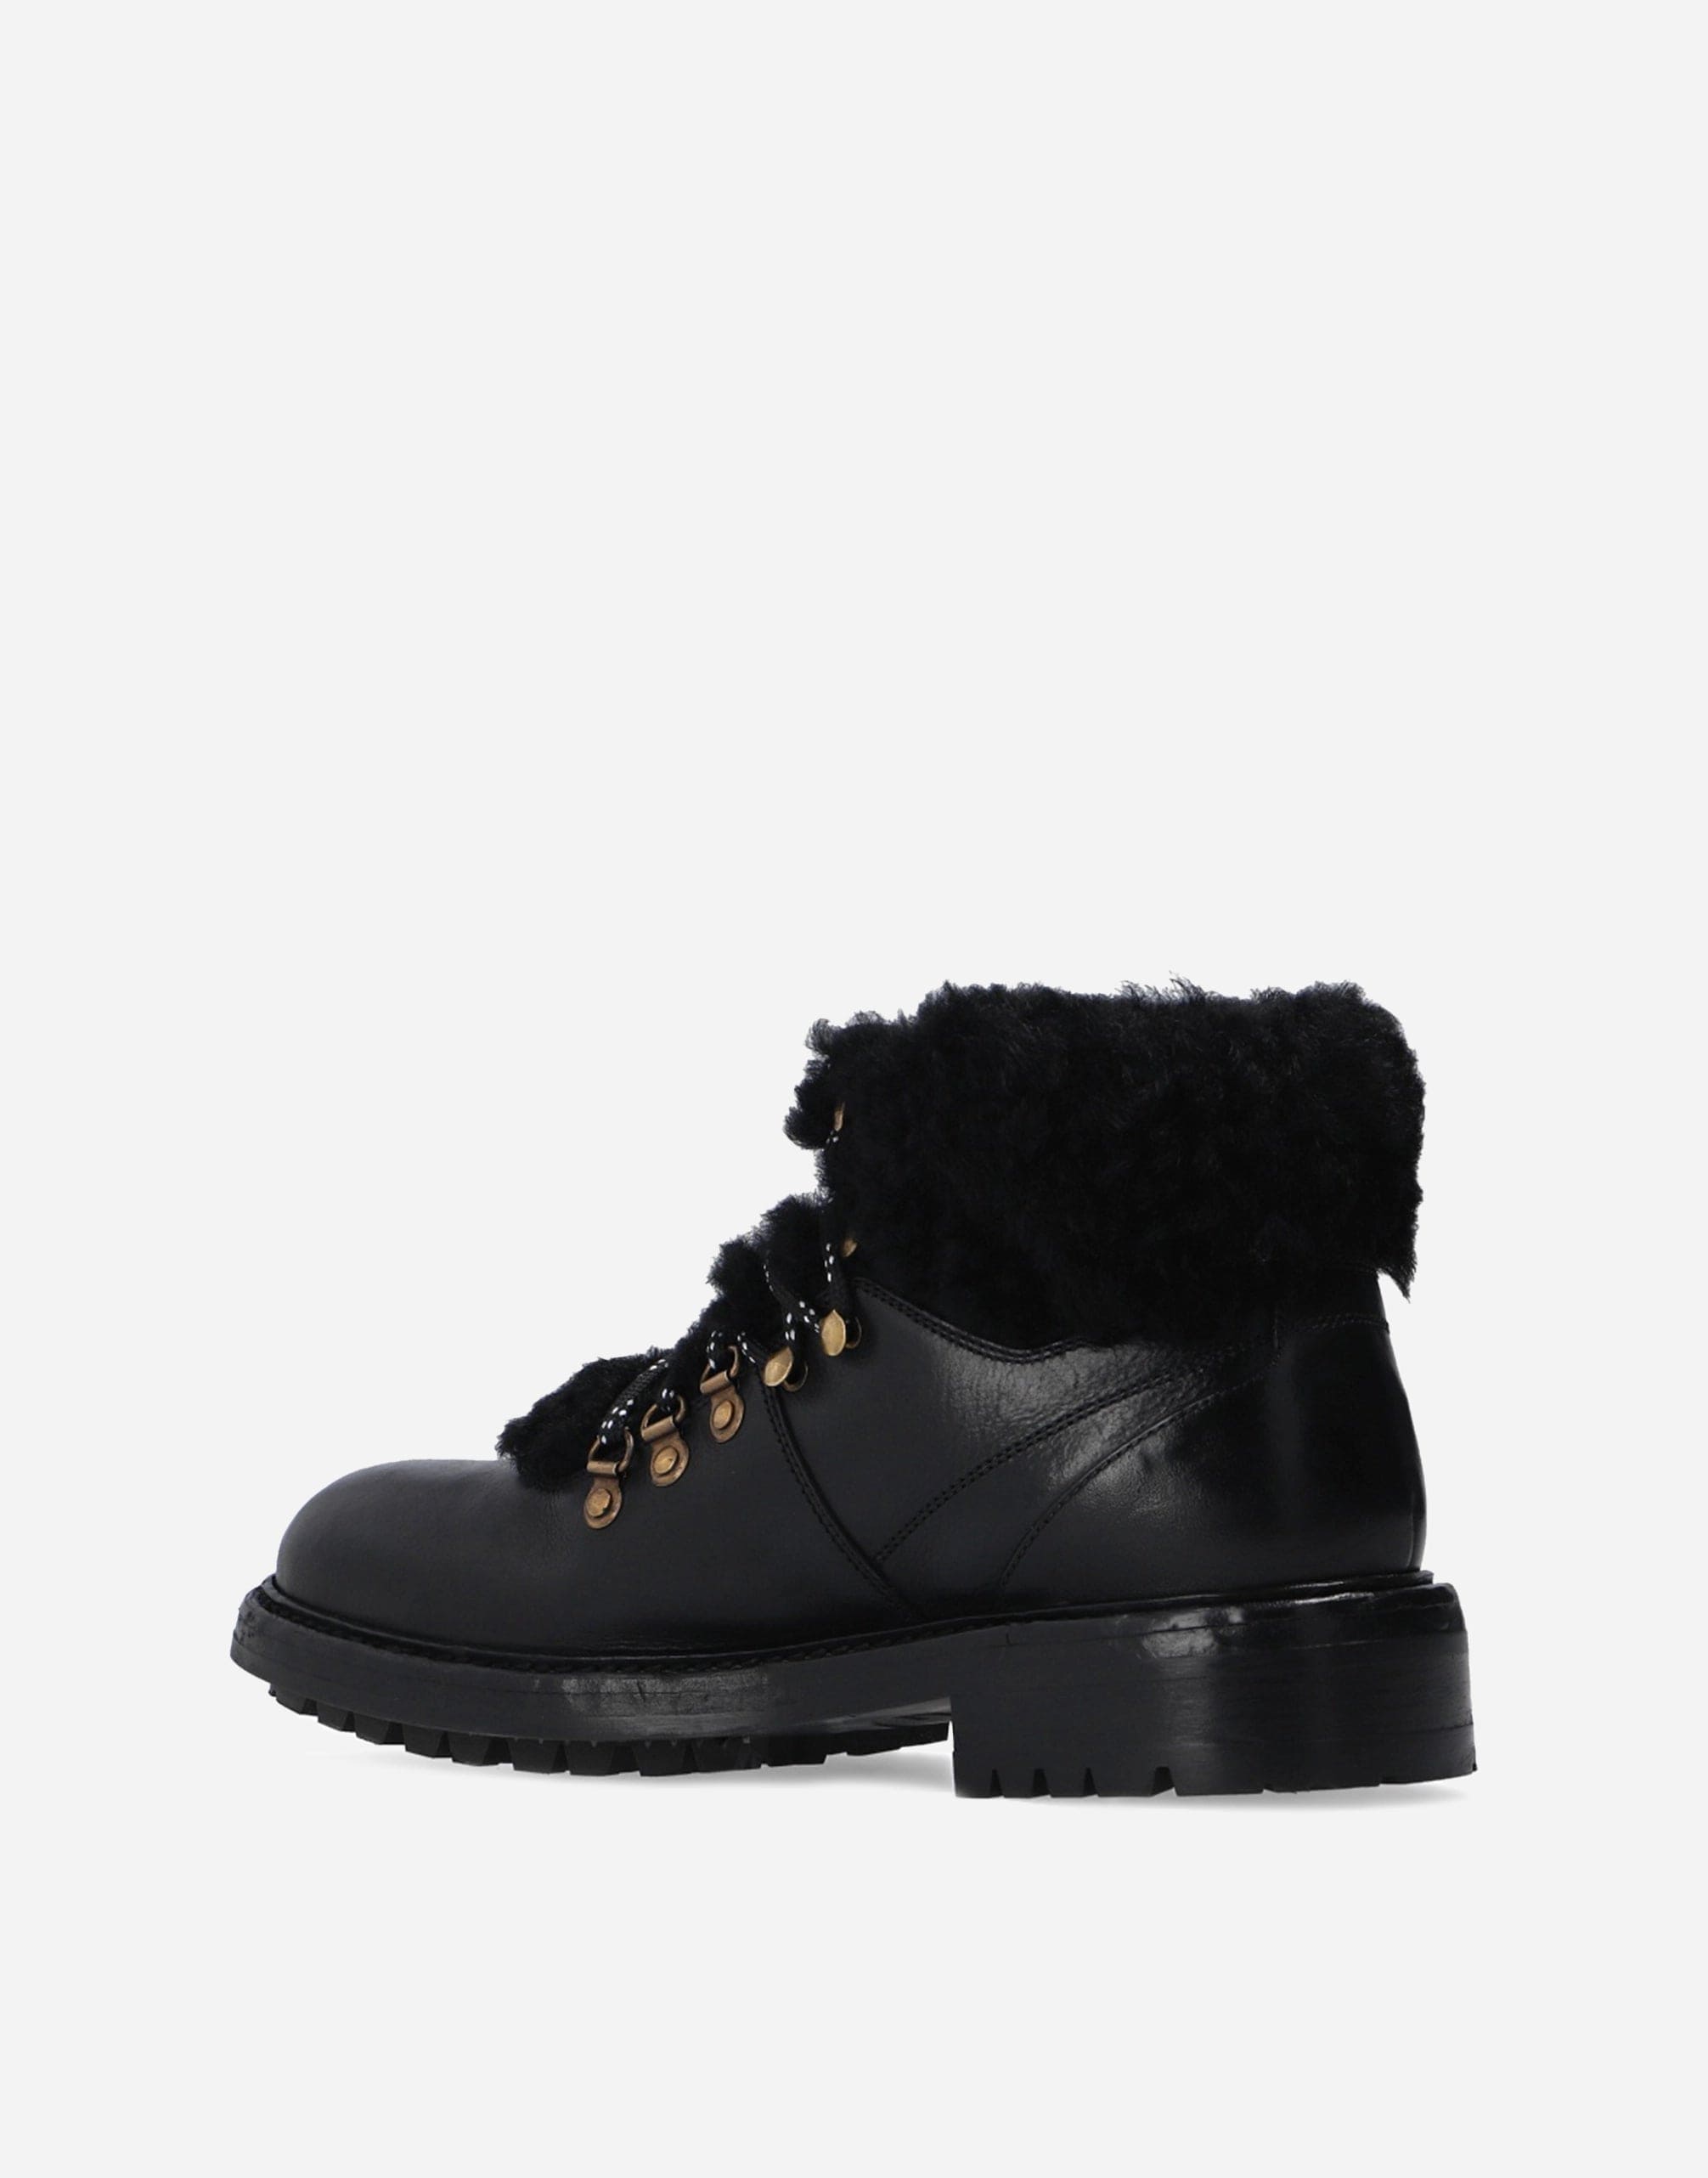 Dolce & Gabbana Fur Lined Hiking Boots